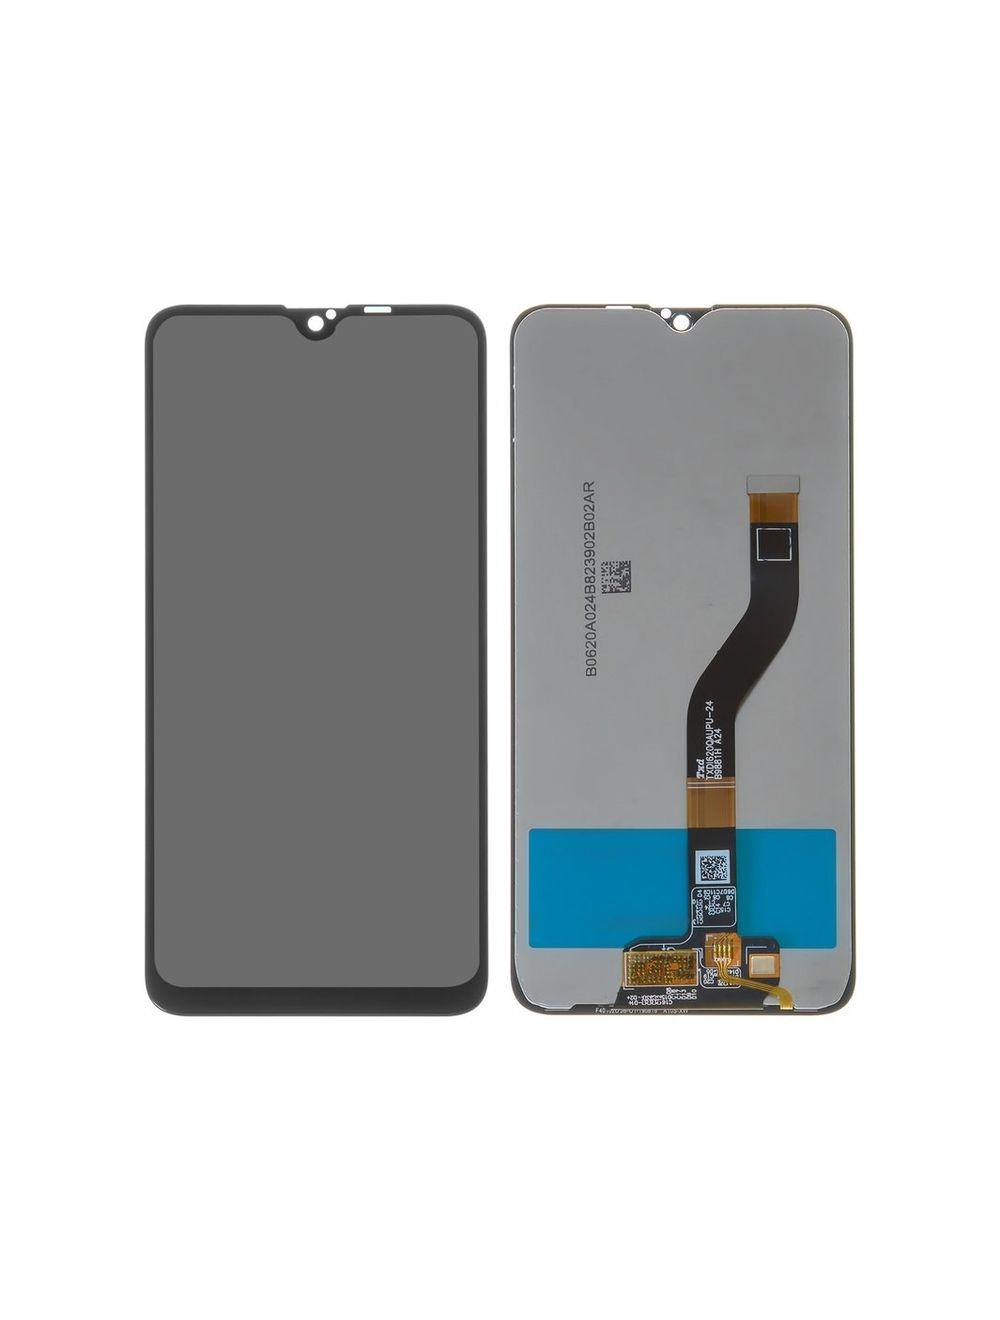 Samsung M10 Display Replacement, Samsung M10 LCD Repairing , Samsung M10 Screen Repairing, Samsung M10 Screen Replacement